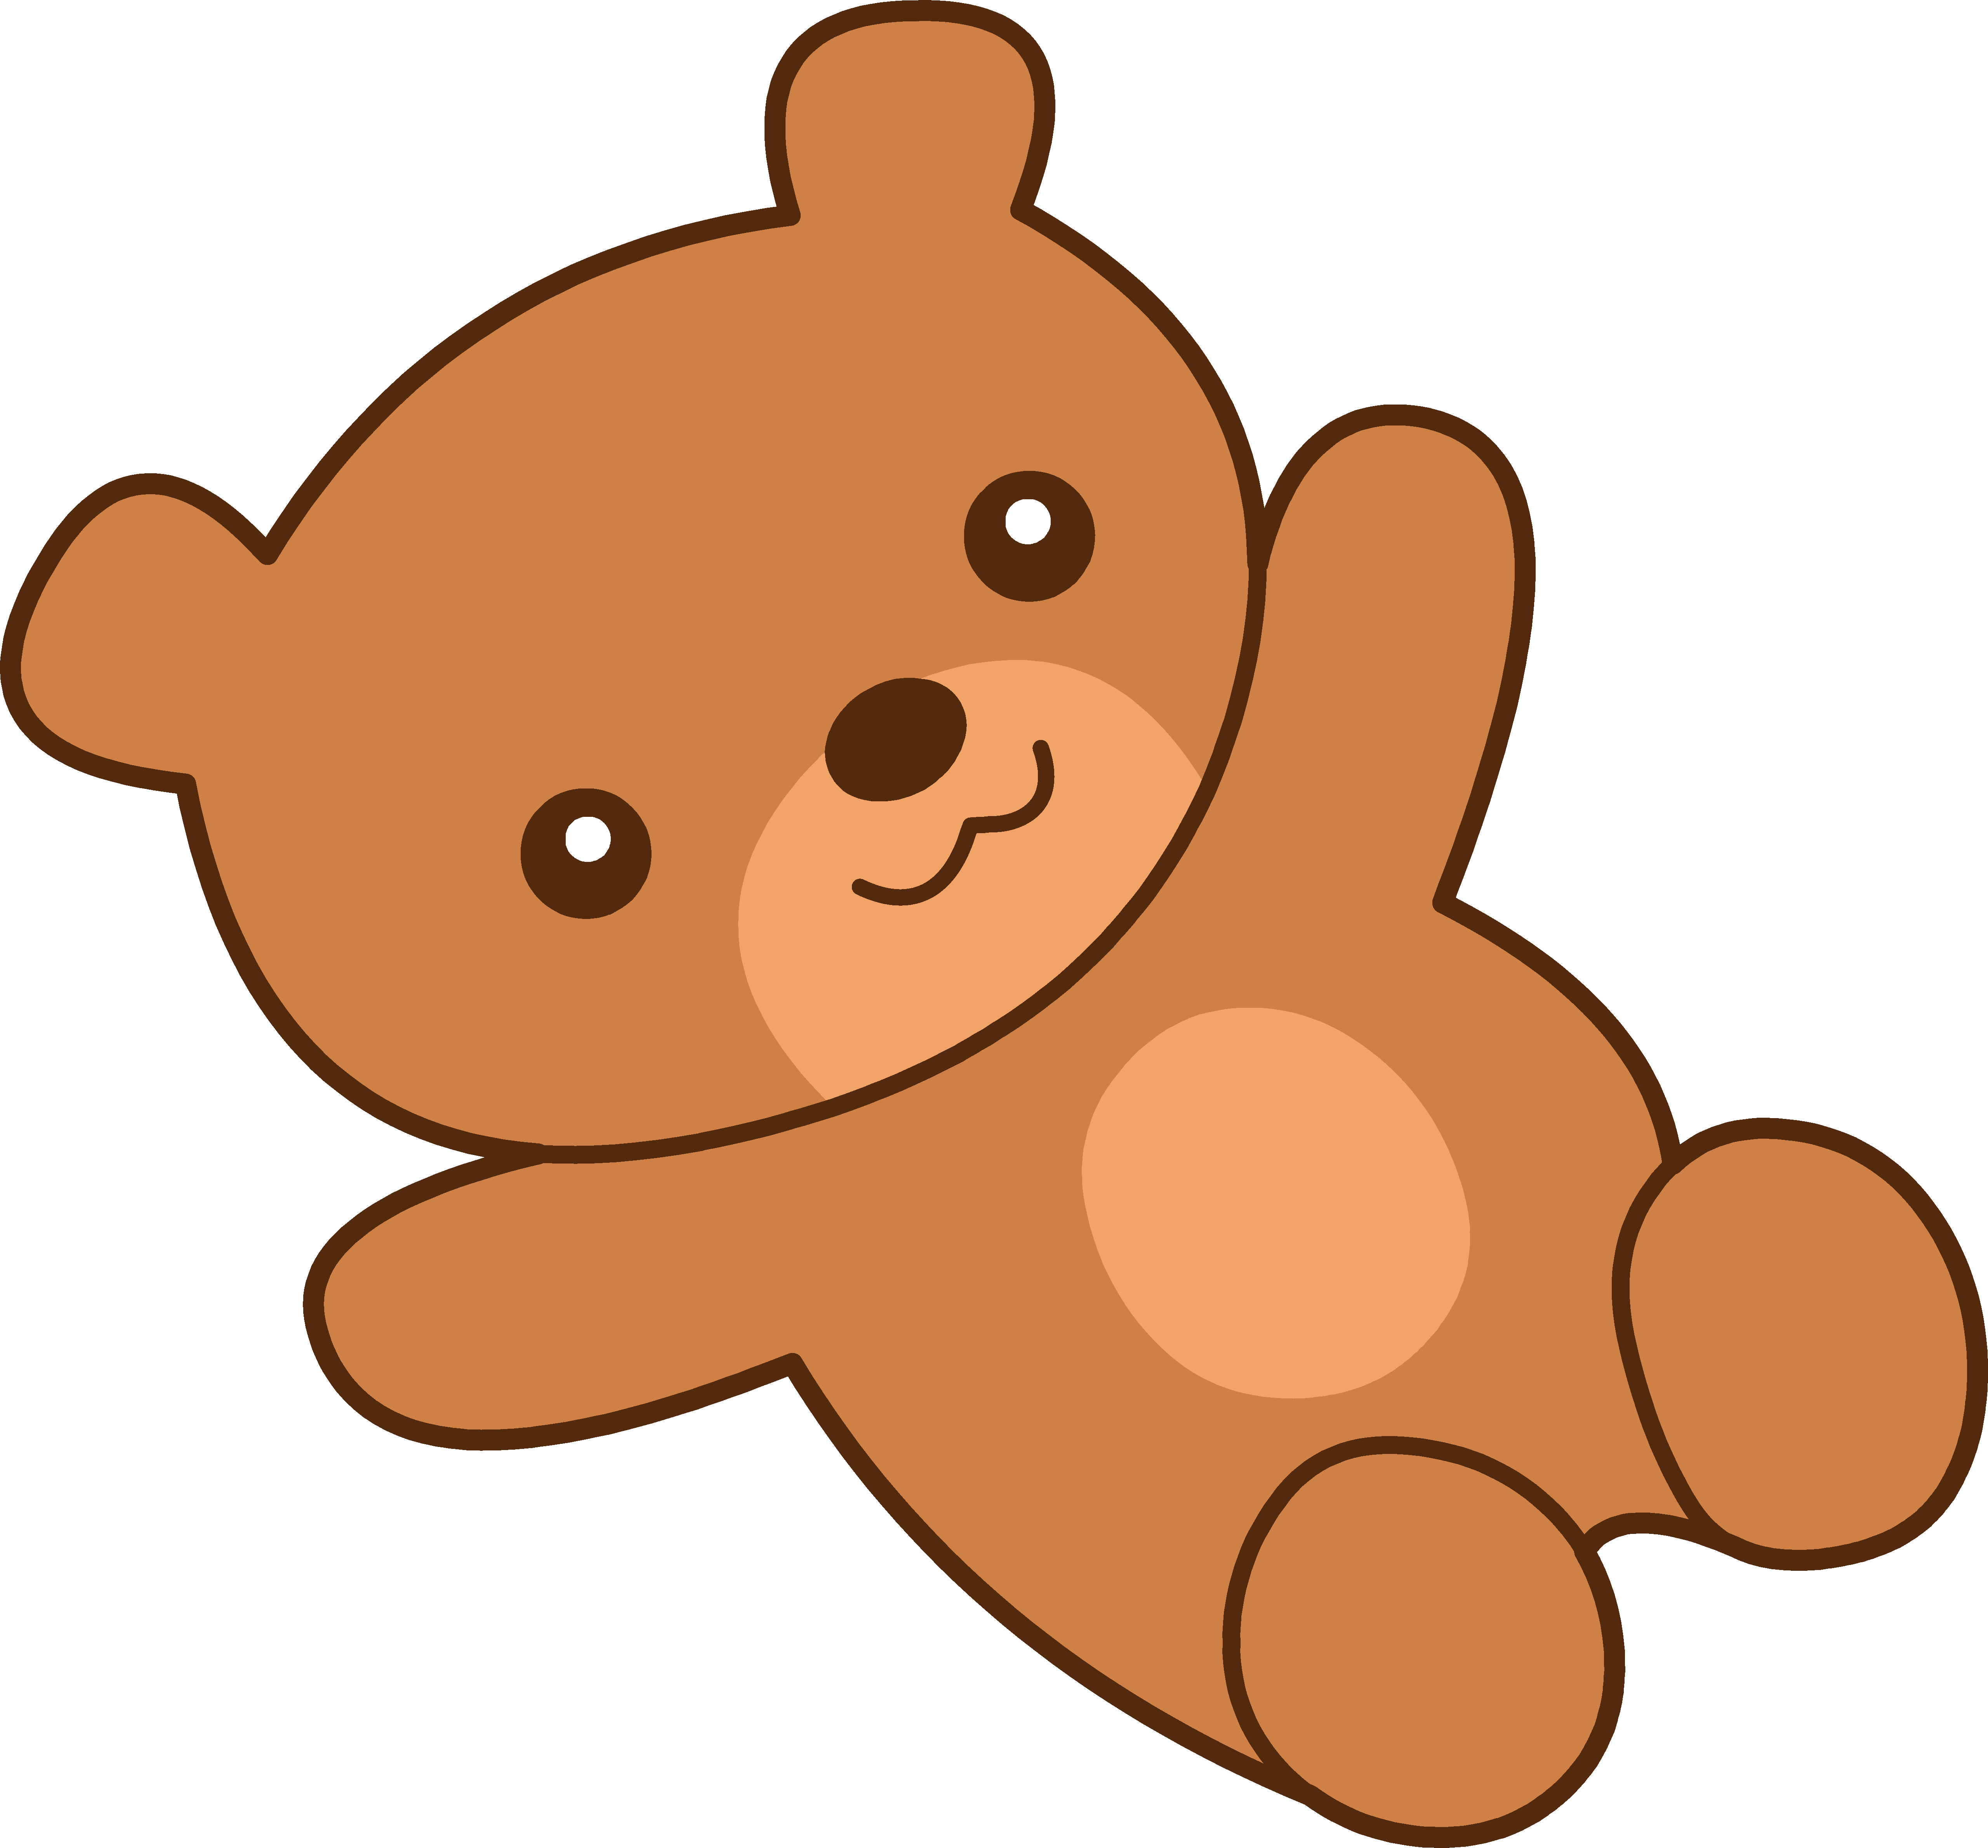 Teddy bear clipart free clipart images 3 - Clipartix